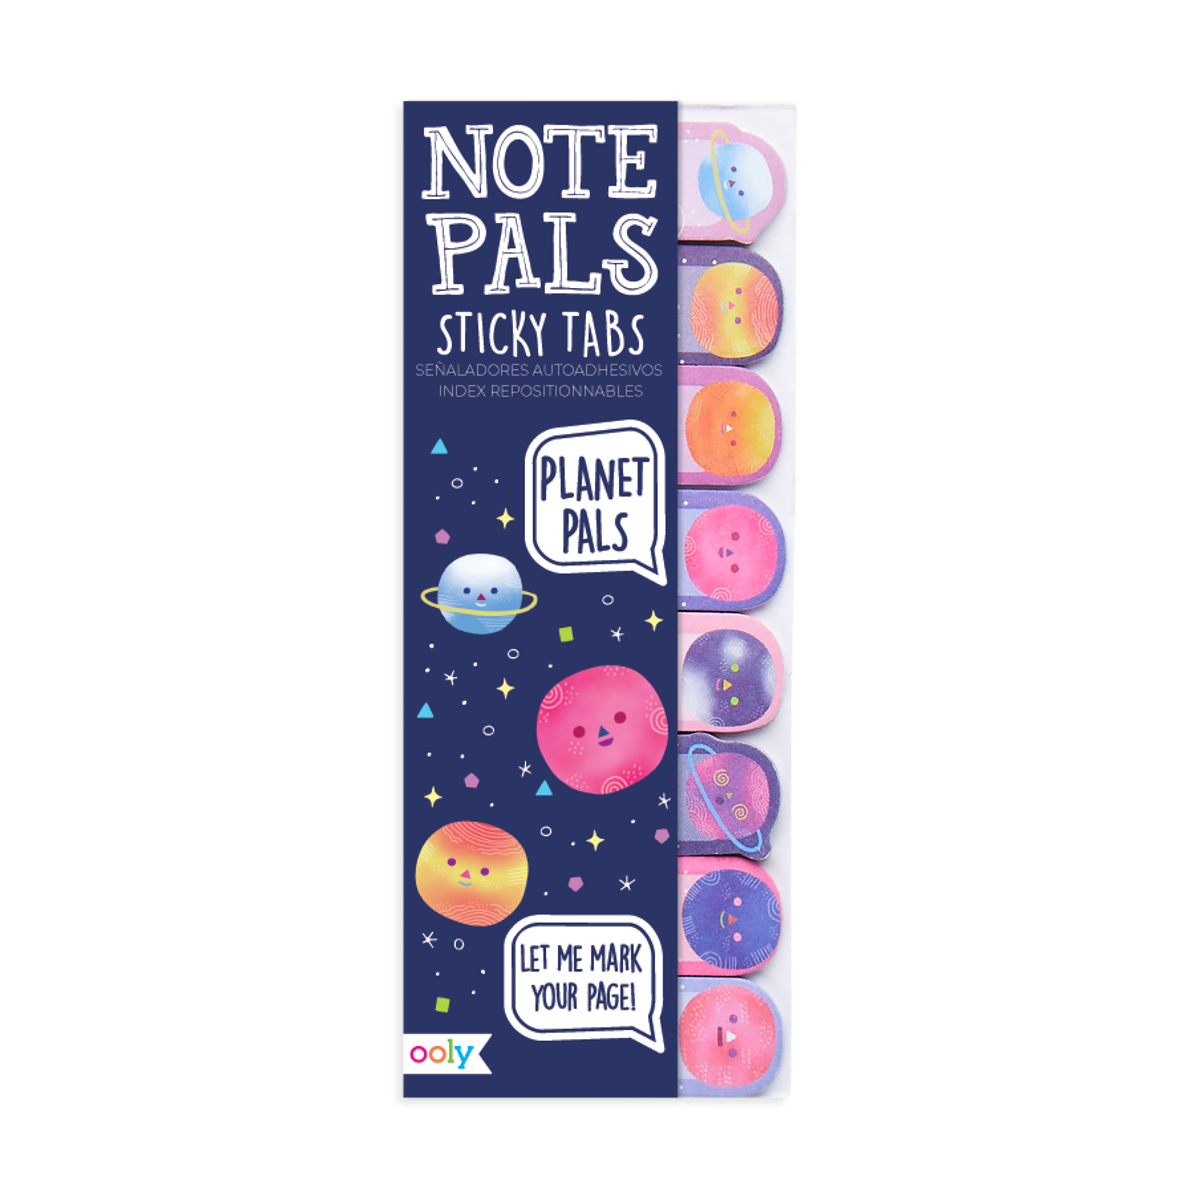 OOLY Note Pals Sticky Tabs - Planet Pals in packaging